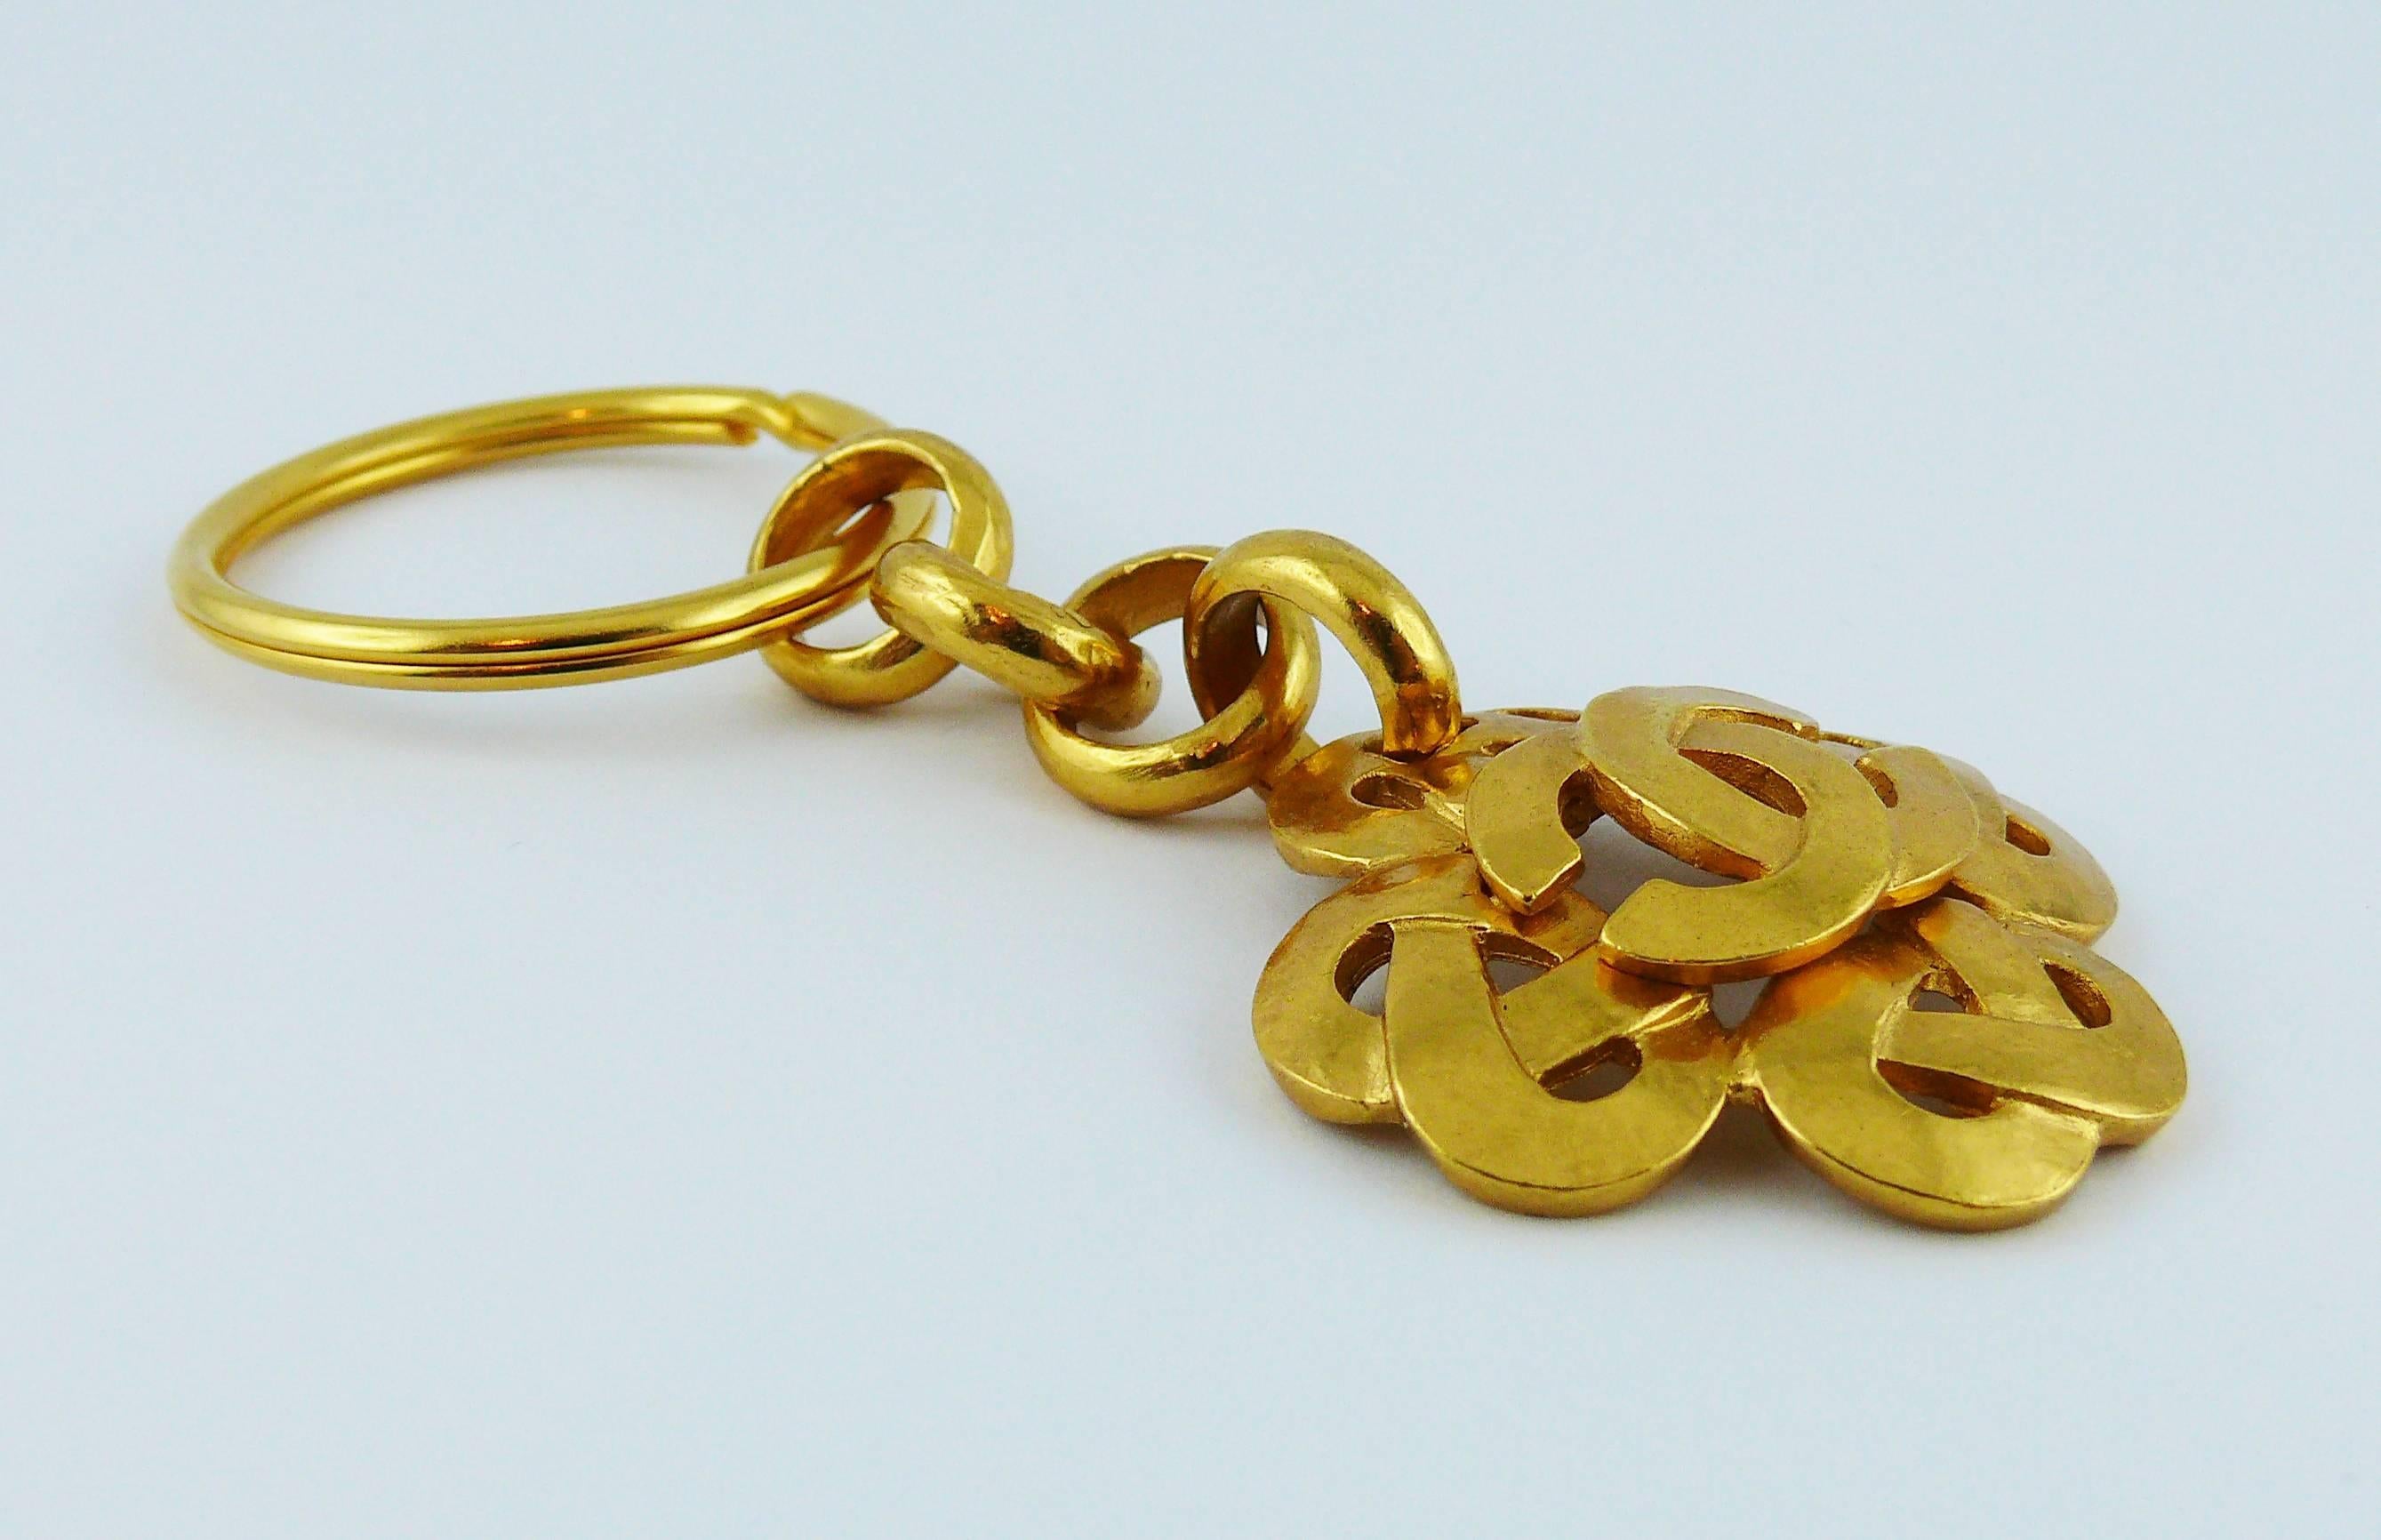 CHANEL gold toned key ring or bag charm featuring an openwork quadrilobe design with CC logo.

Spring/Summer 1997 Collection.

Marked CHANEL 97 P Made in France.

Indicative measurements : max. drop approx. 7 cm (2.76 inches) / pendant approx. 3.5